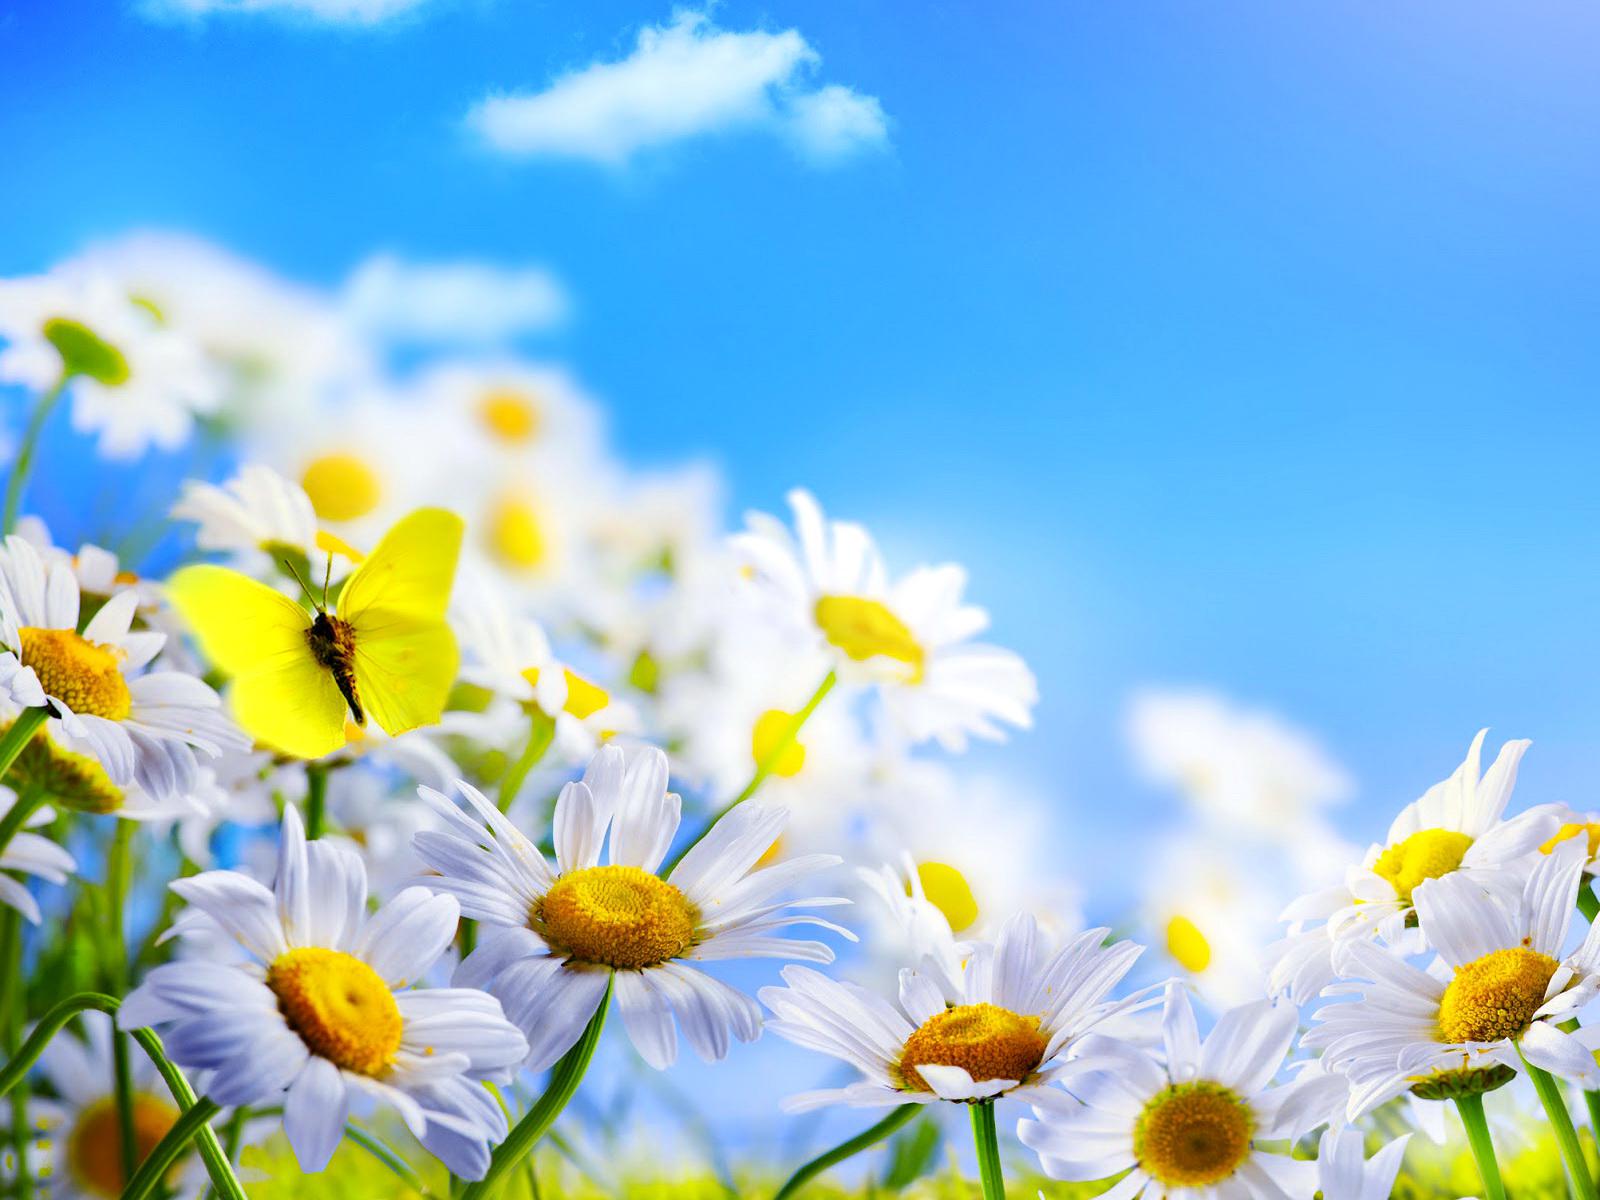 Daisies field - - High Quality and Resolution Wallpapers